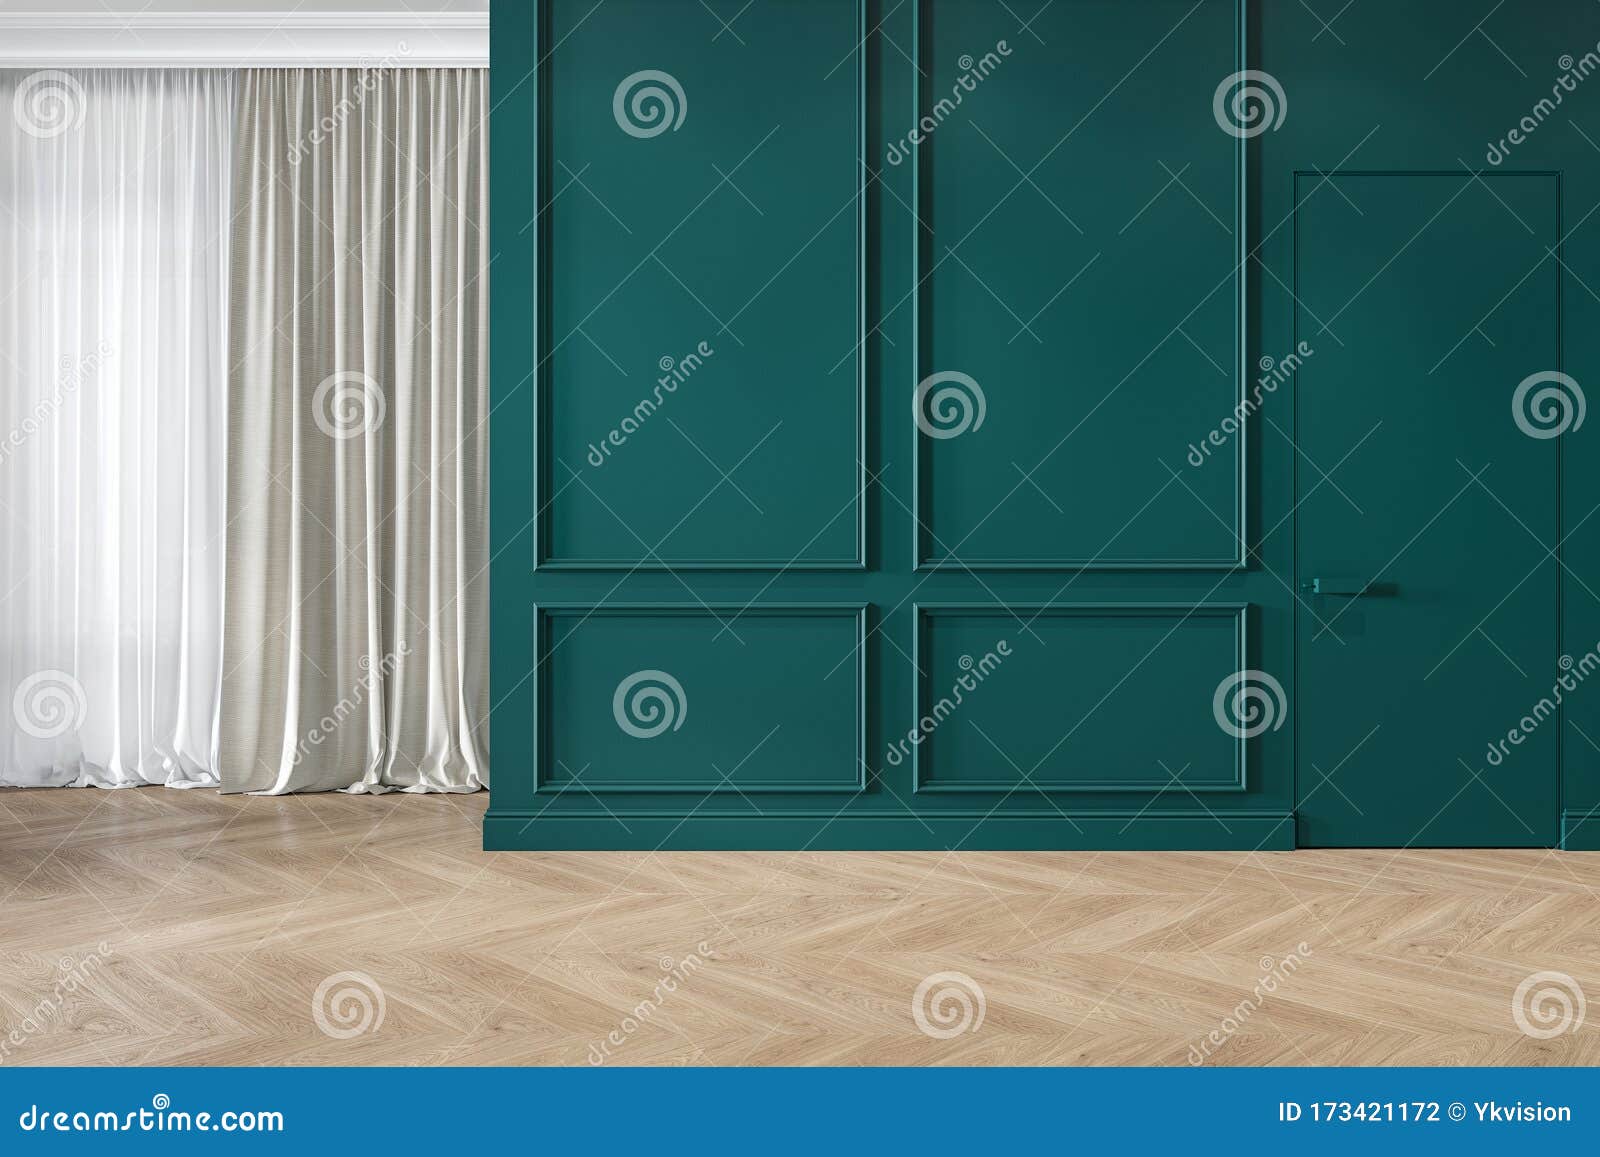 modern classic green interior blank wall with moldings, curtains, hiden door and wood floor.